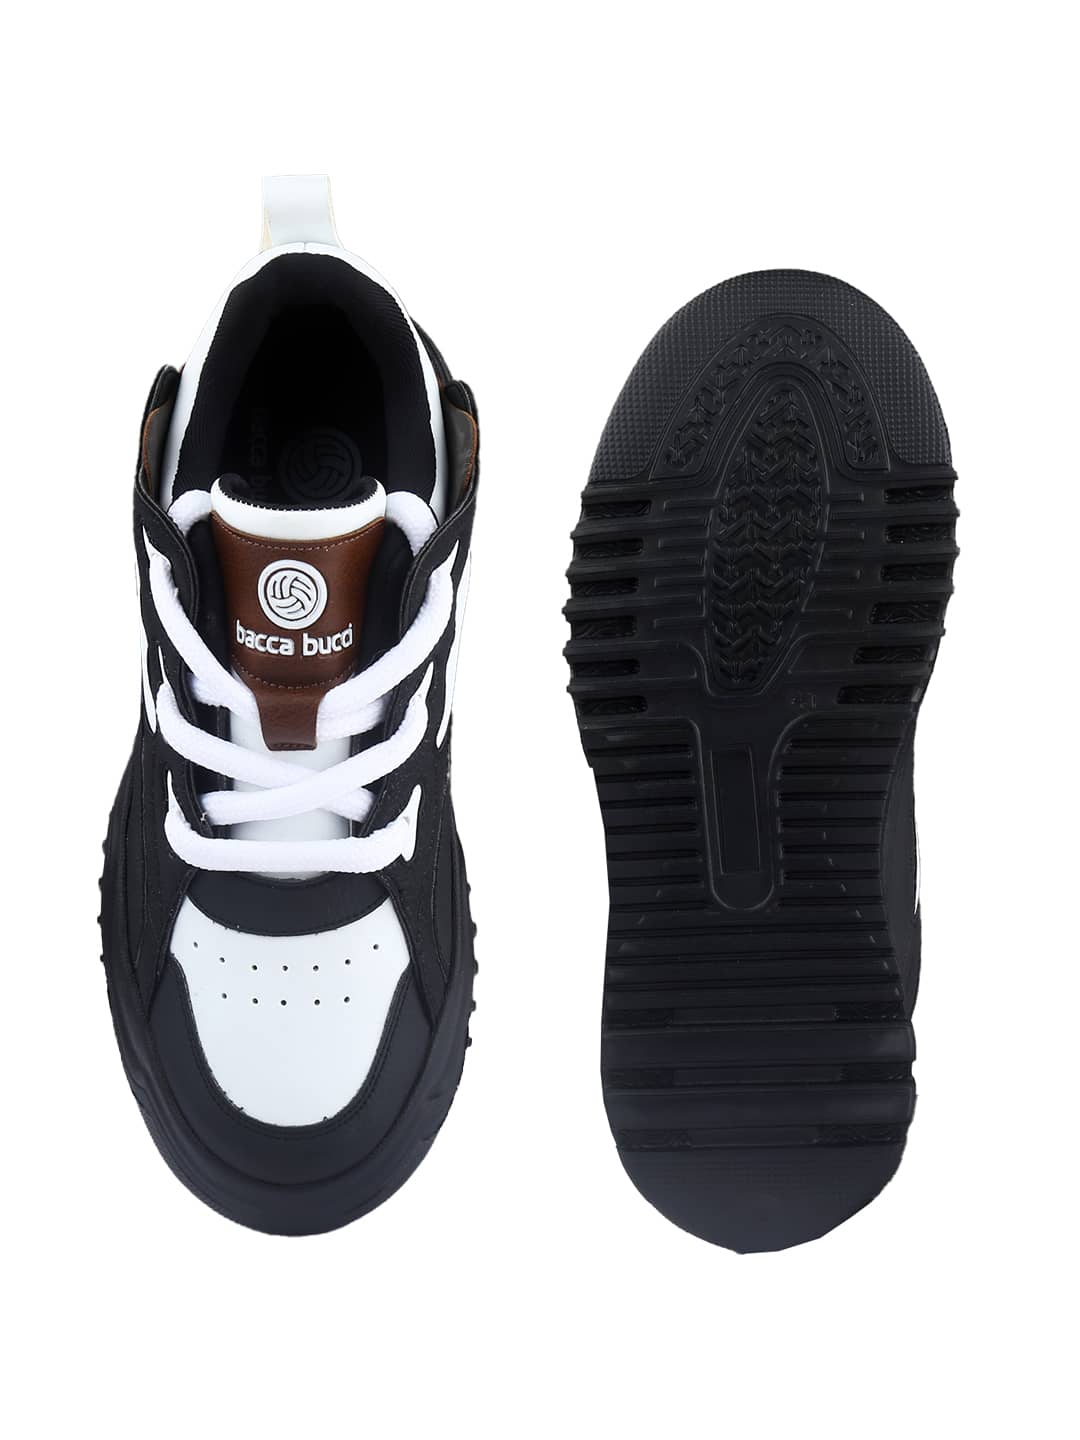 Bacca Bucci OG TerraForge Low-Top Series: Bold Street-Ready Sneakers with Signature Chunky Traction Sole